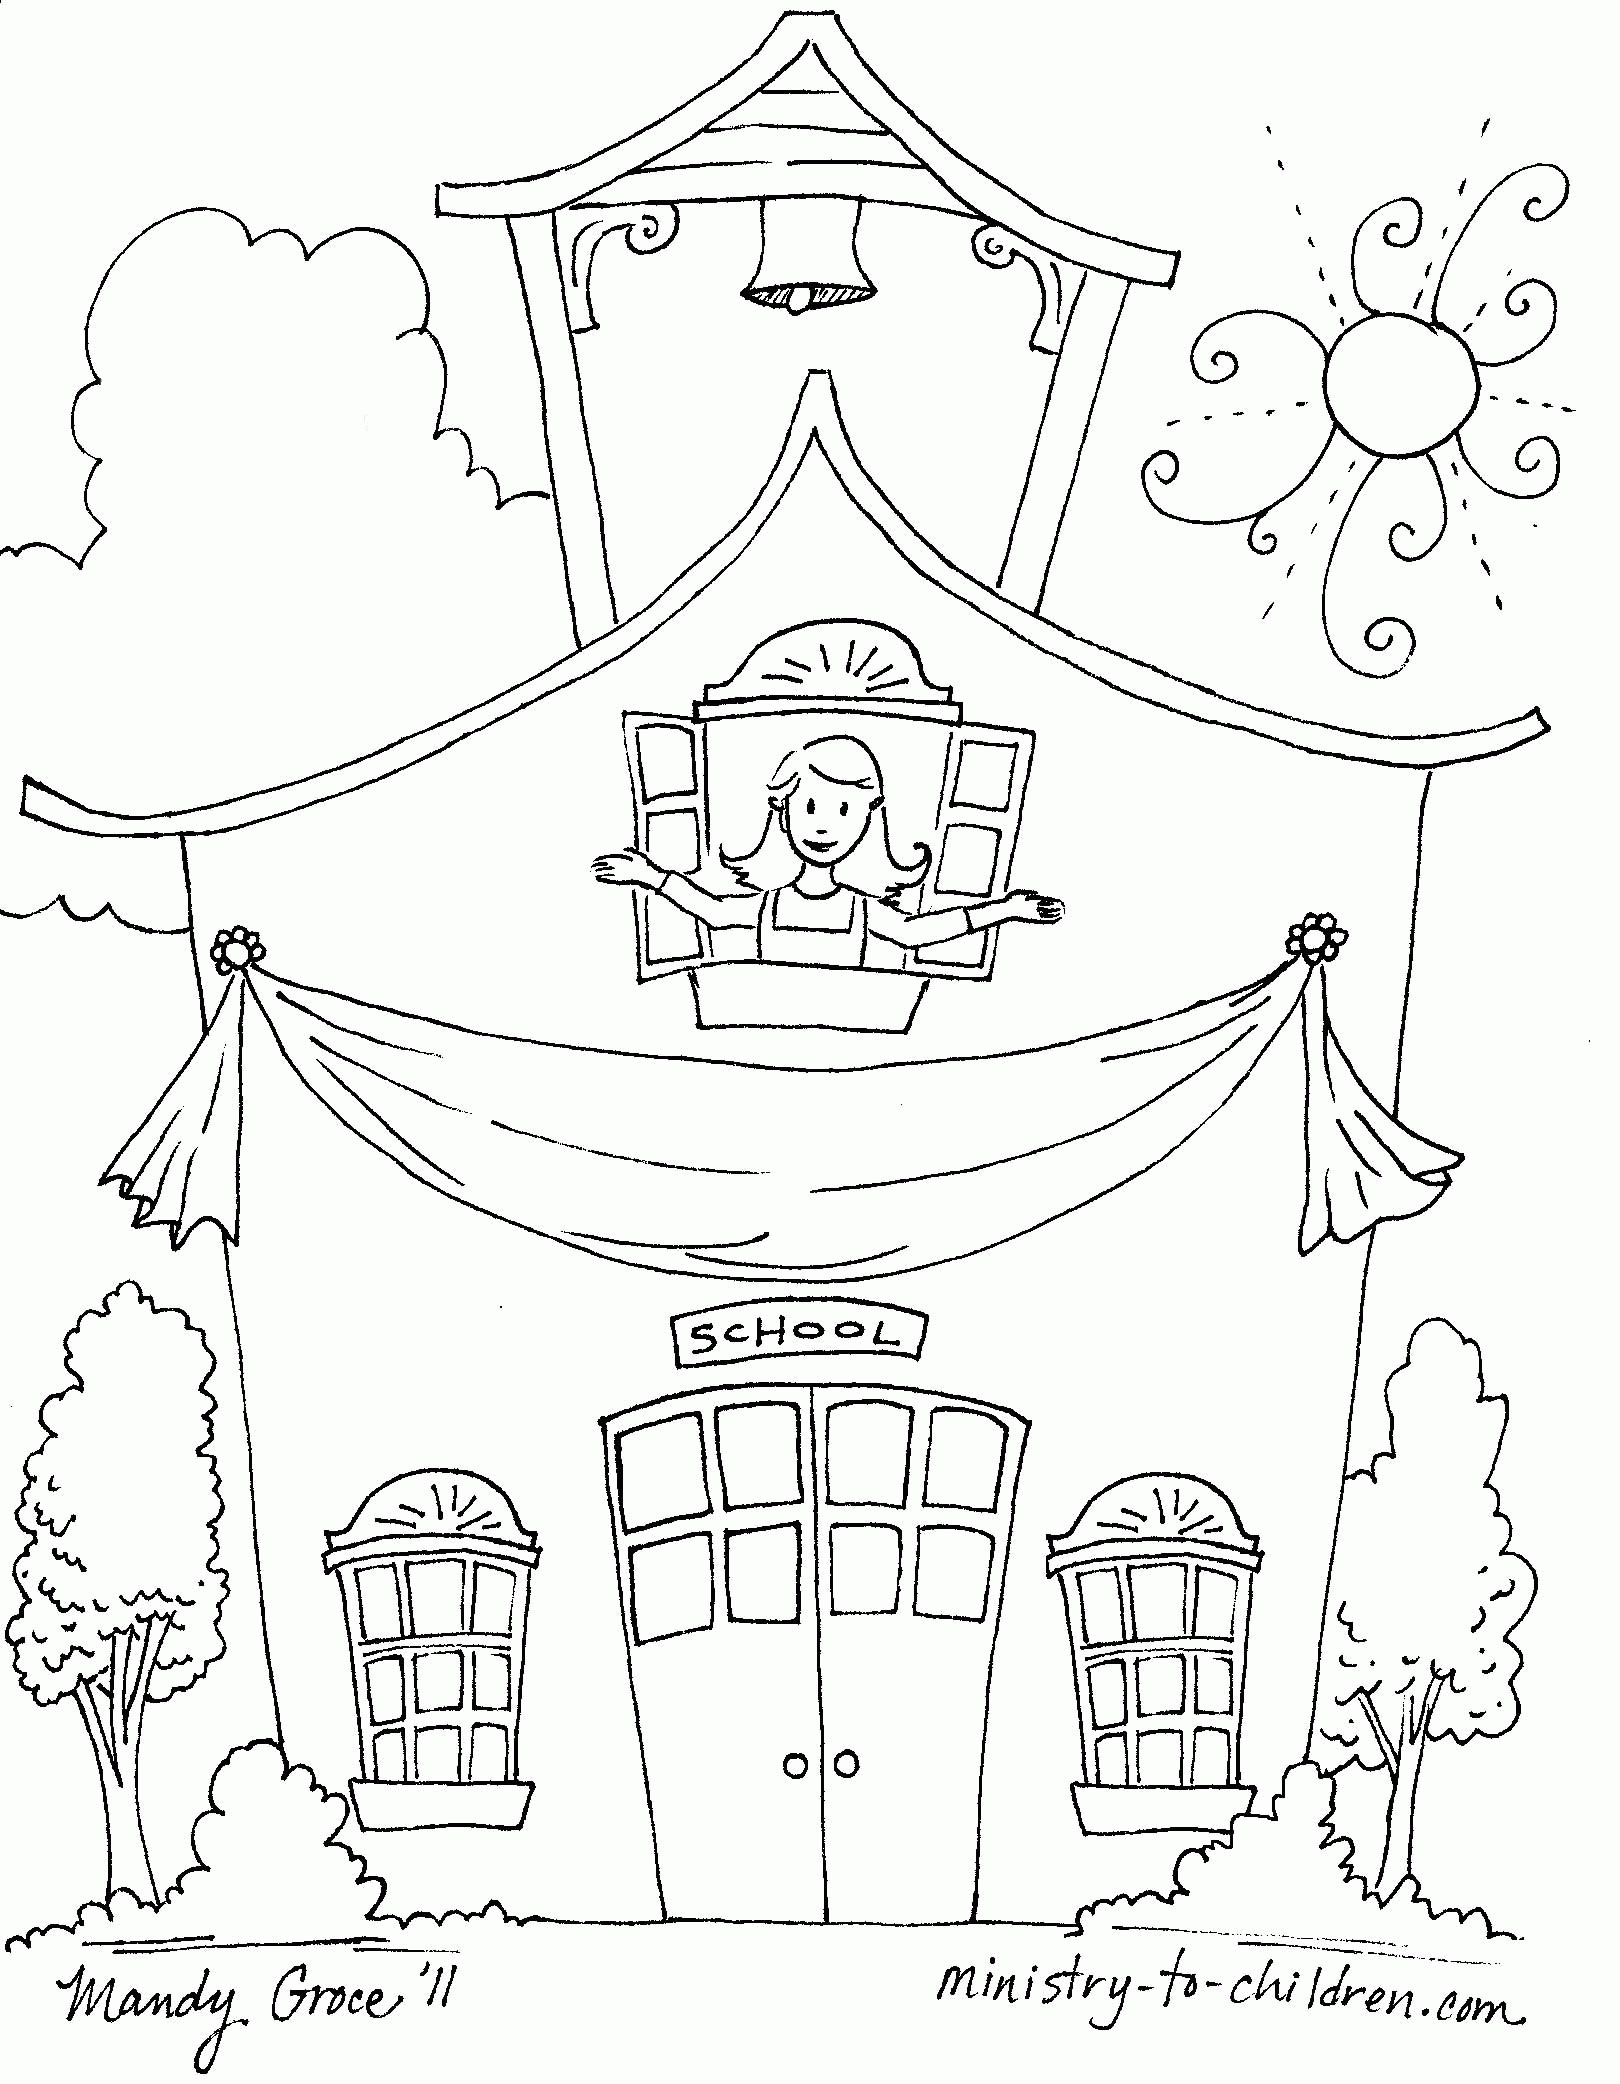 free-last-day-of-school-coloring-page-download-free-last-day-of-school